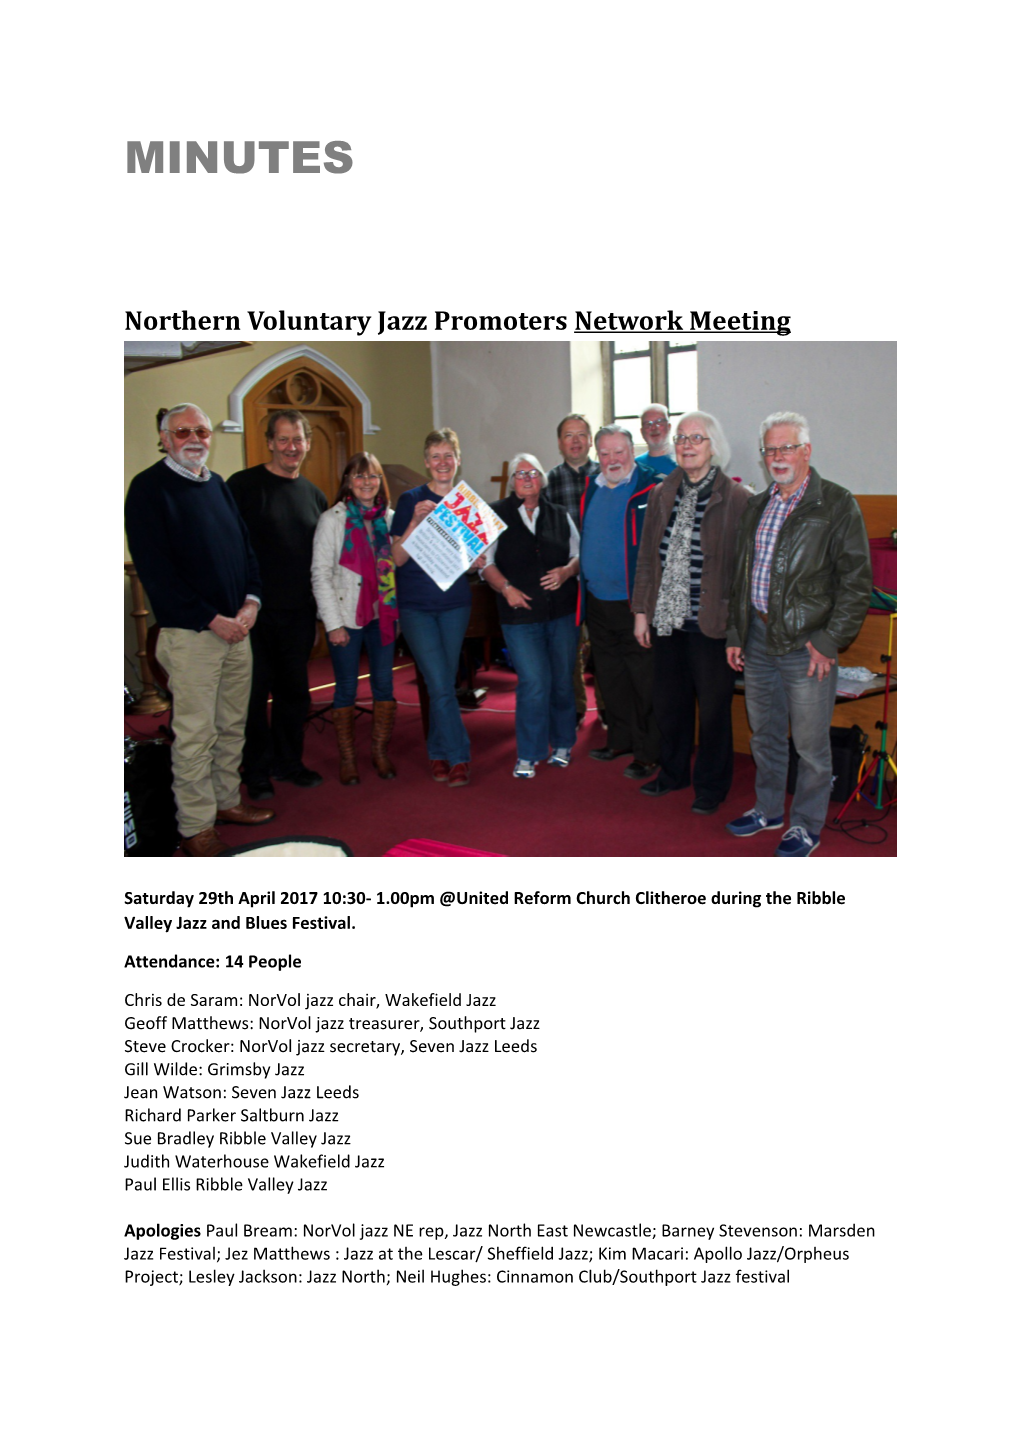 Northern Voluntary Jazz Promoters Network Meeting